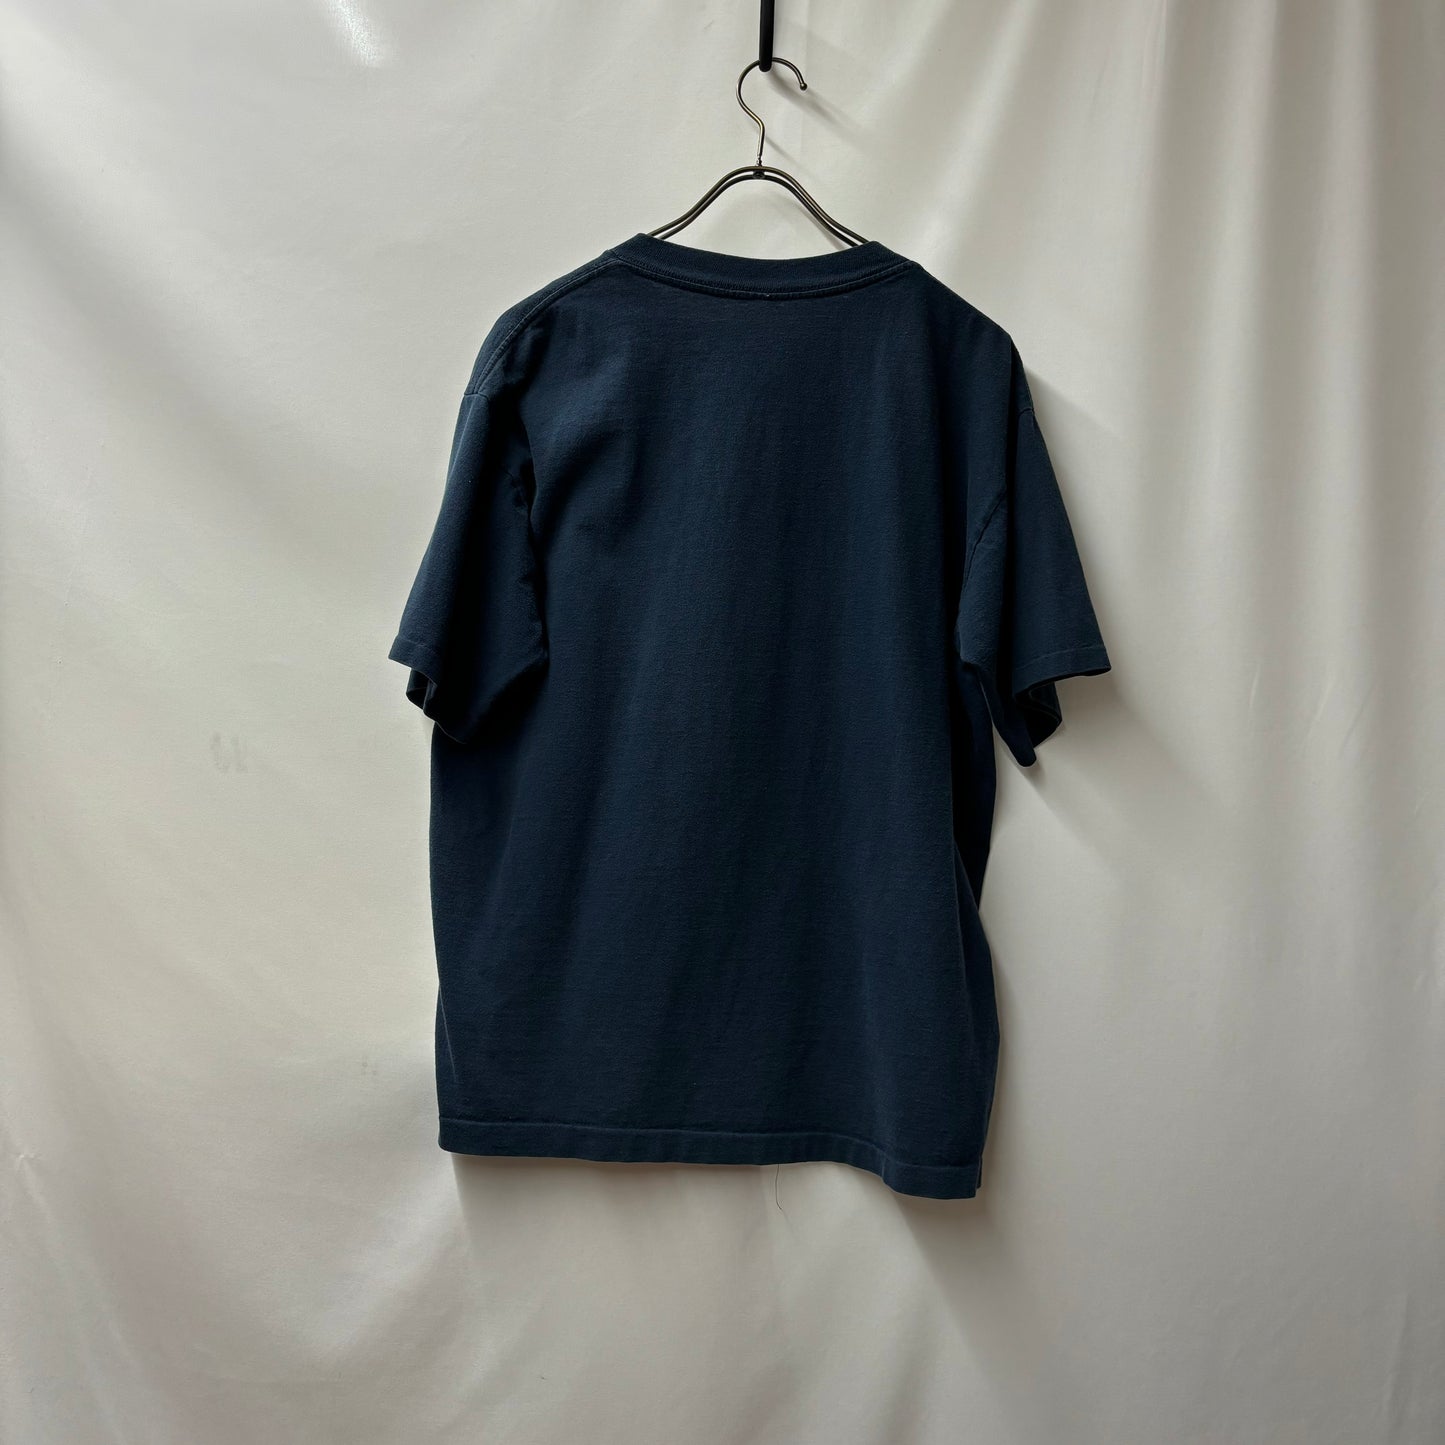 90-00s vintage Tee シングルステッチ